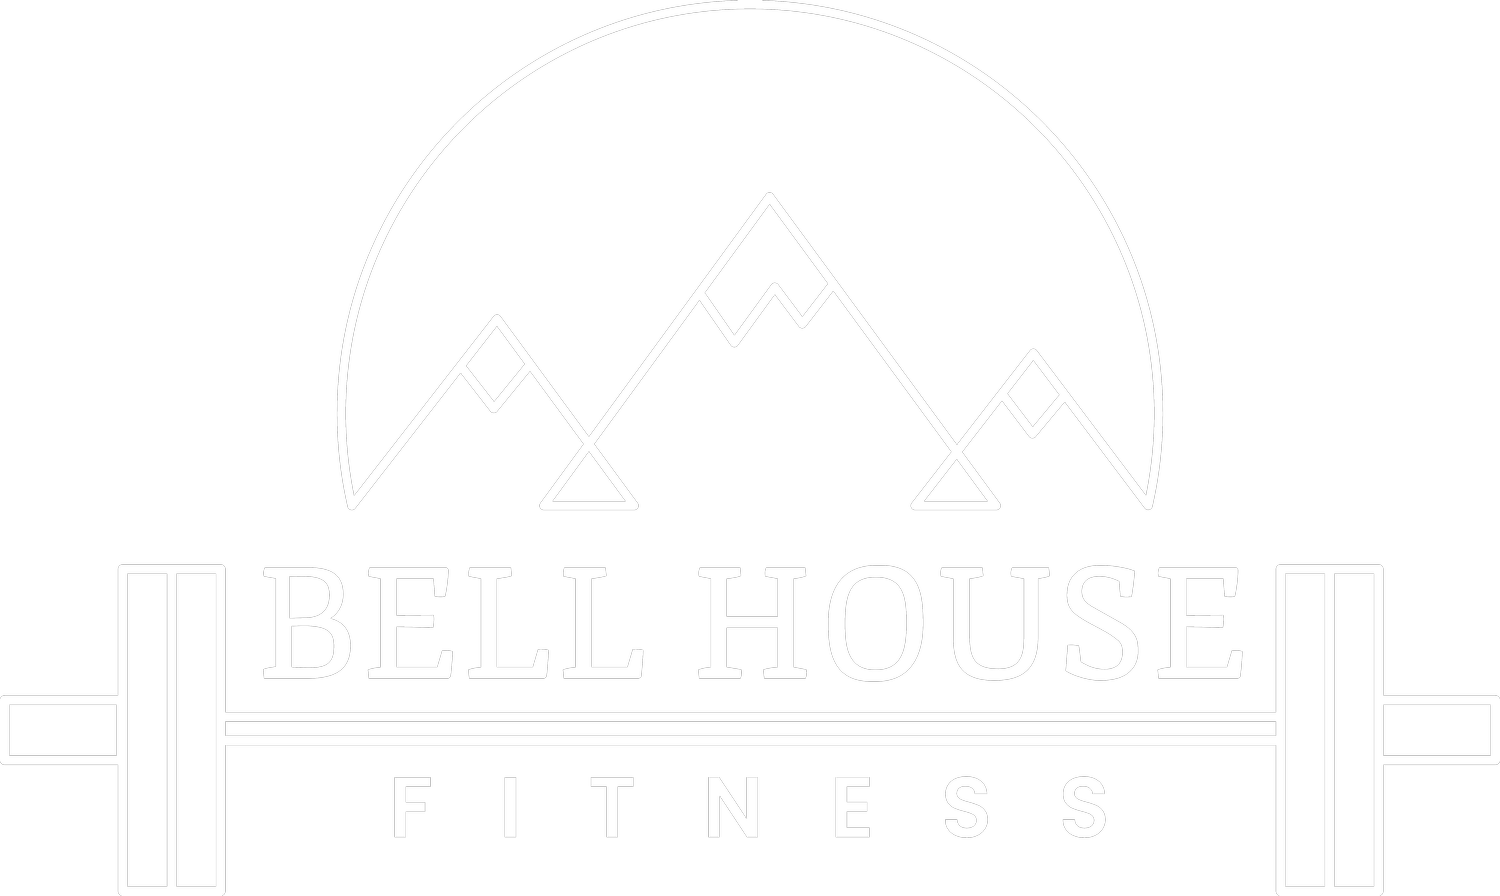 BELL HOUSE FITNESS